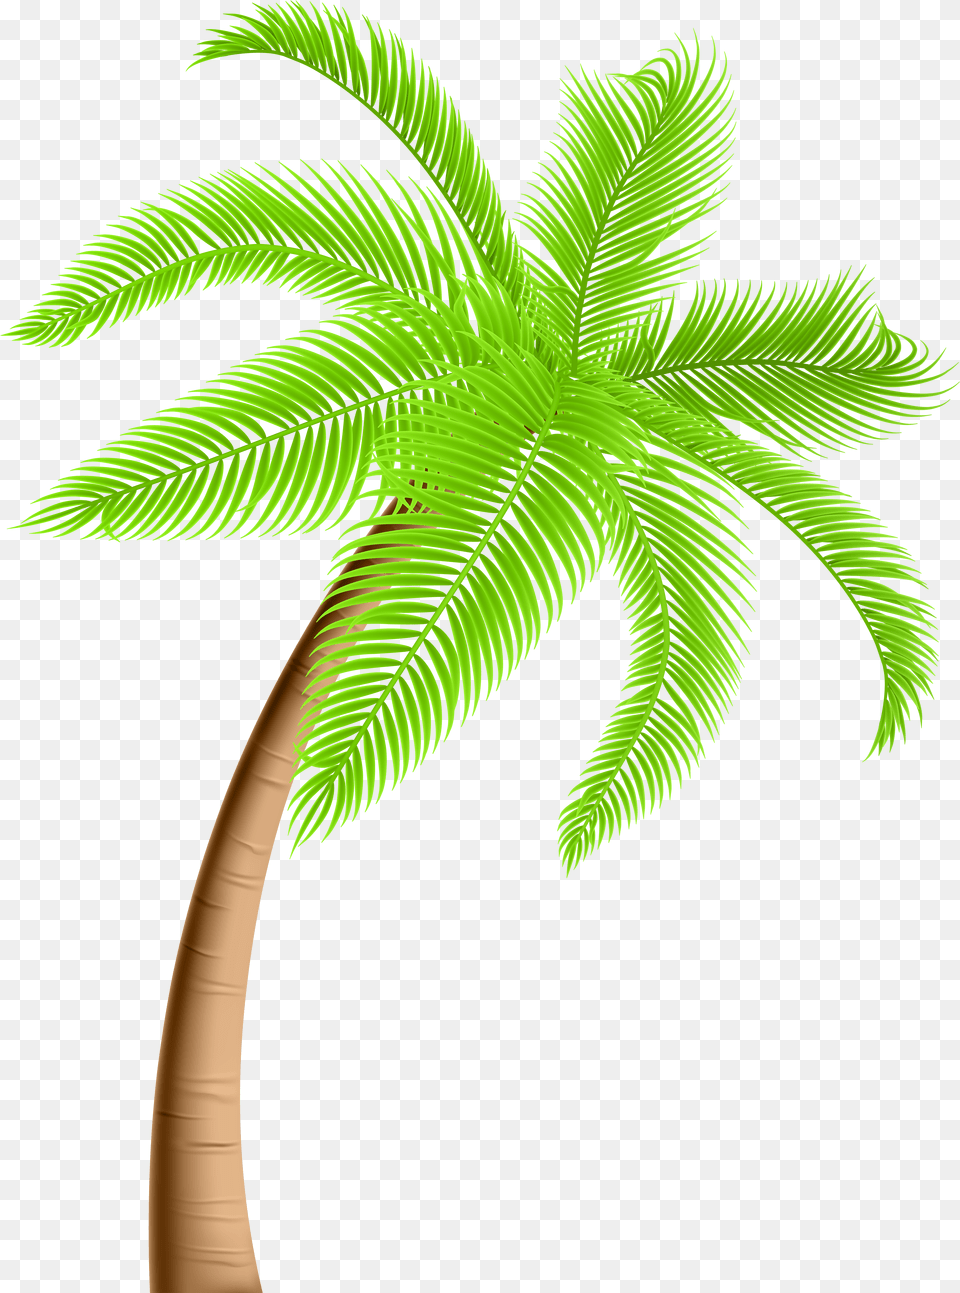 Library Of Palm Tree Jpg Freeuse Background Palm Tree Free Png Download